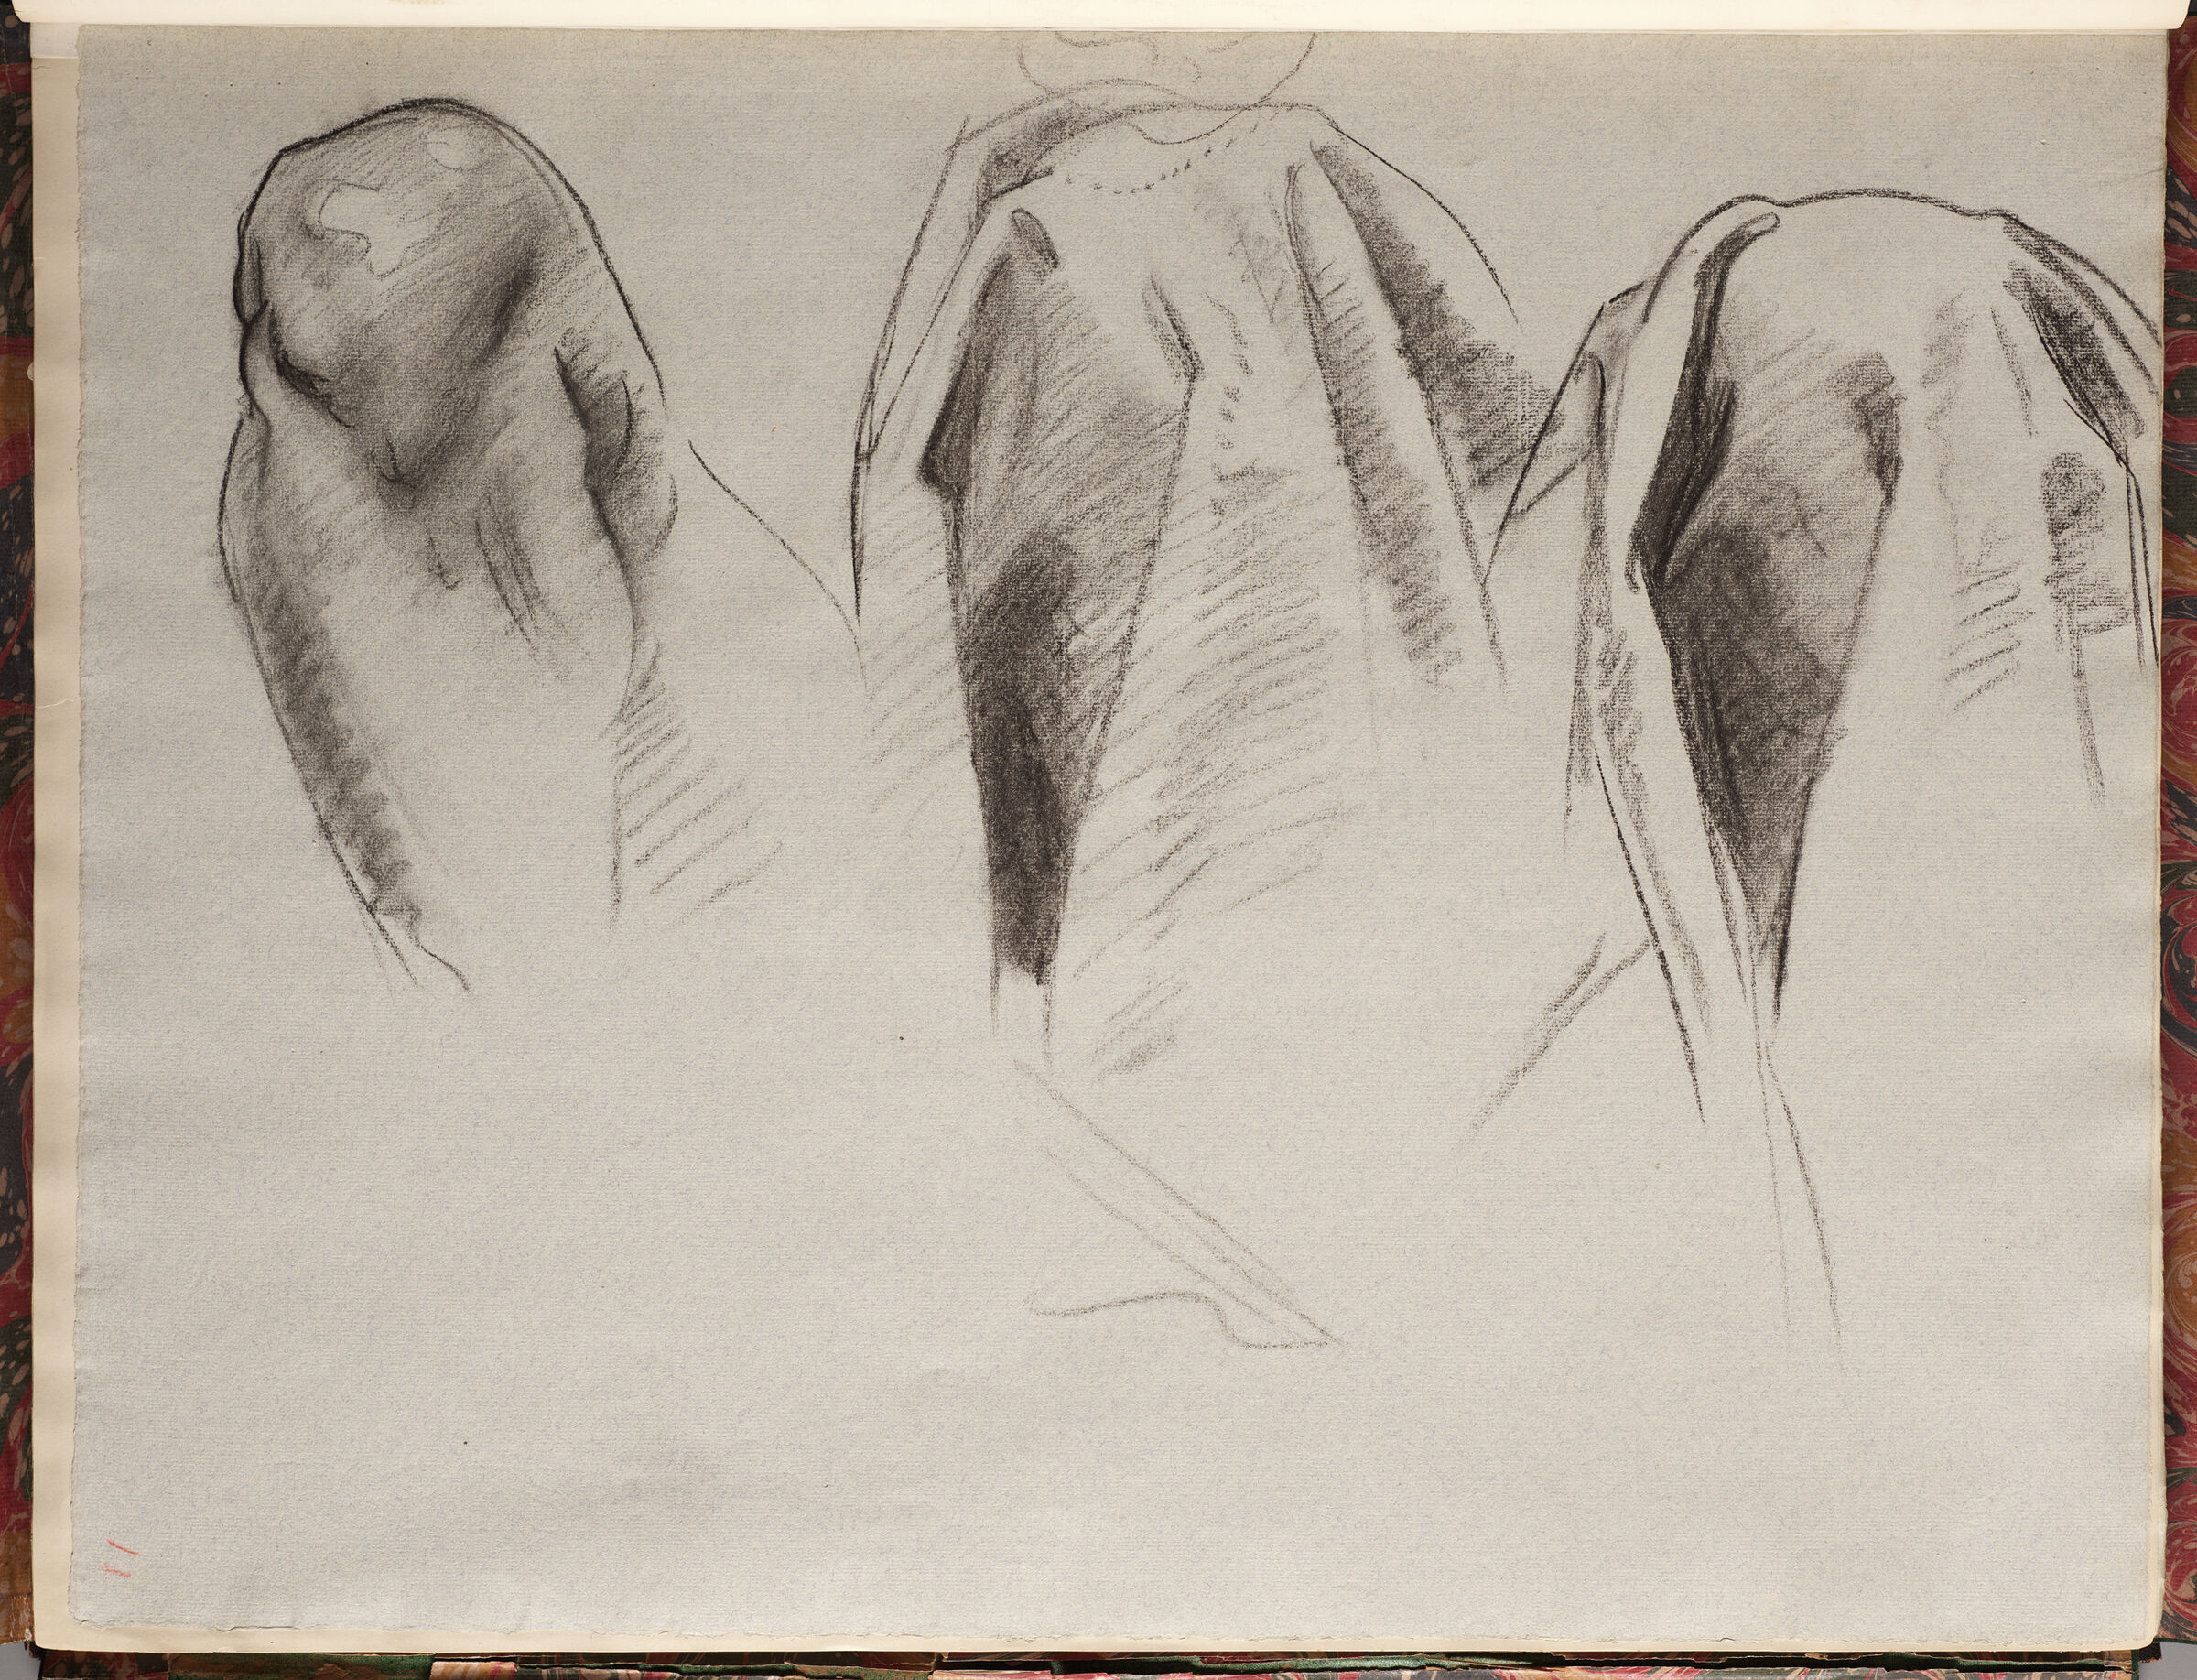 Studies Of Knees For The Law, 